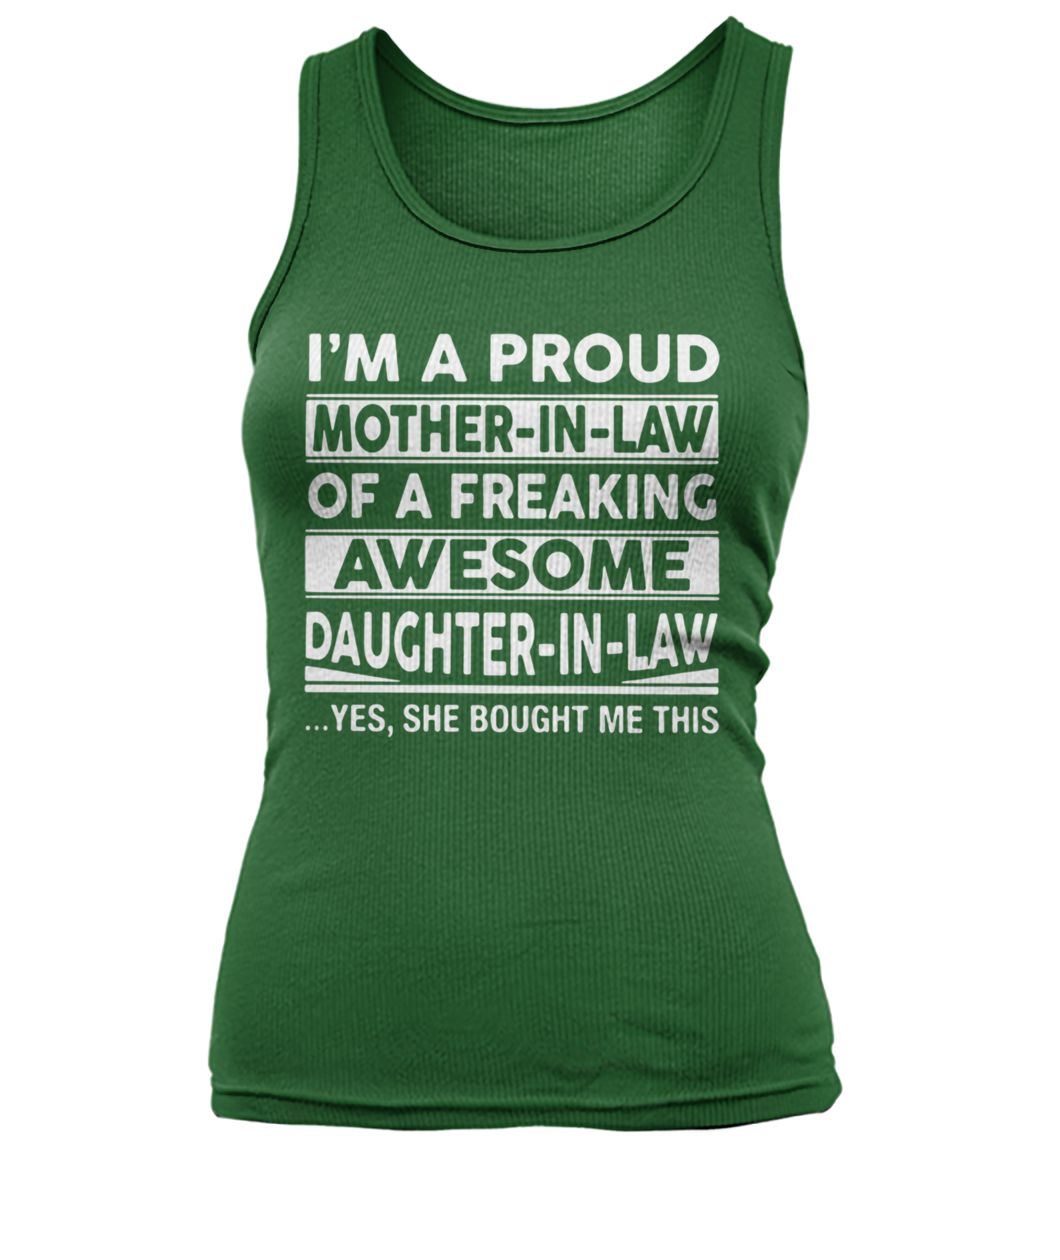 I'm a proud mother-in-law of a freaking awesome daughter-in-law yes she bought me this women's tank top